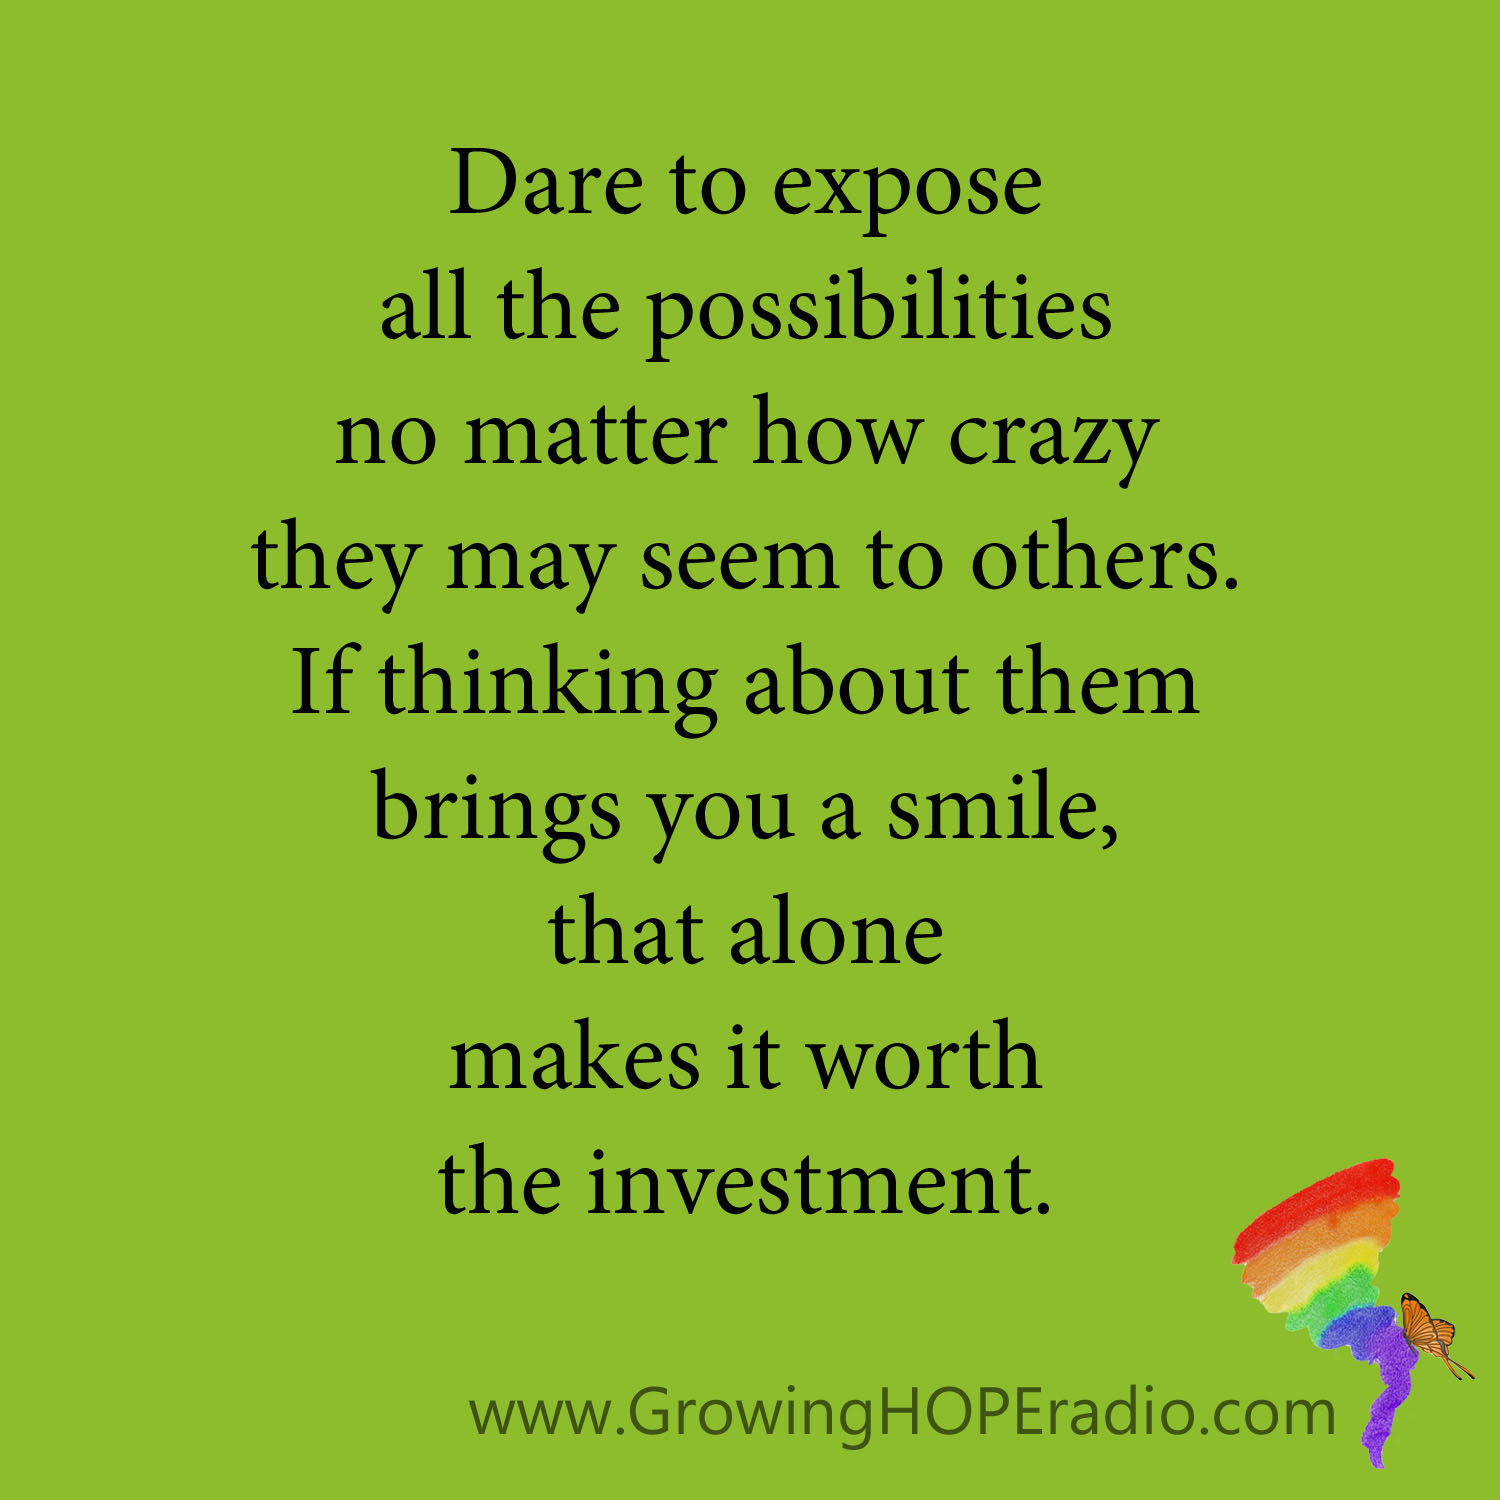 #GrowingHOPE daily - dare to expose possibilities